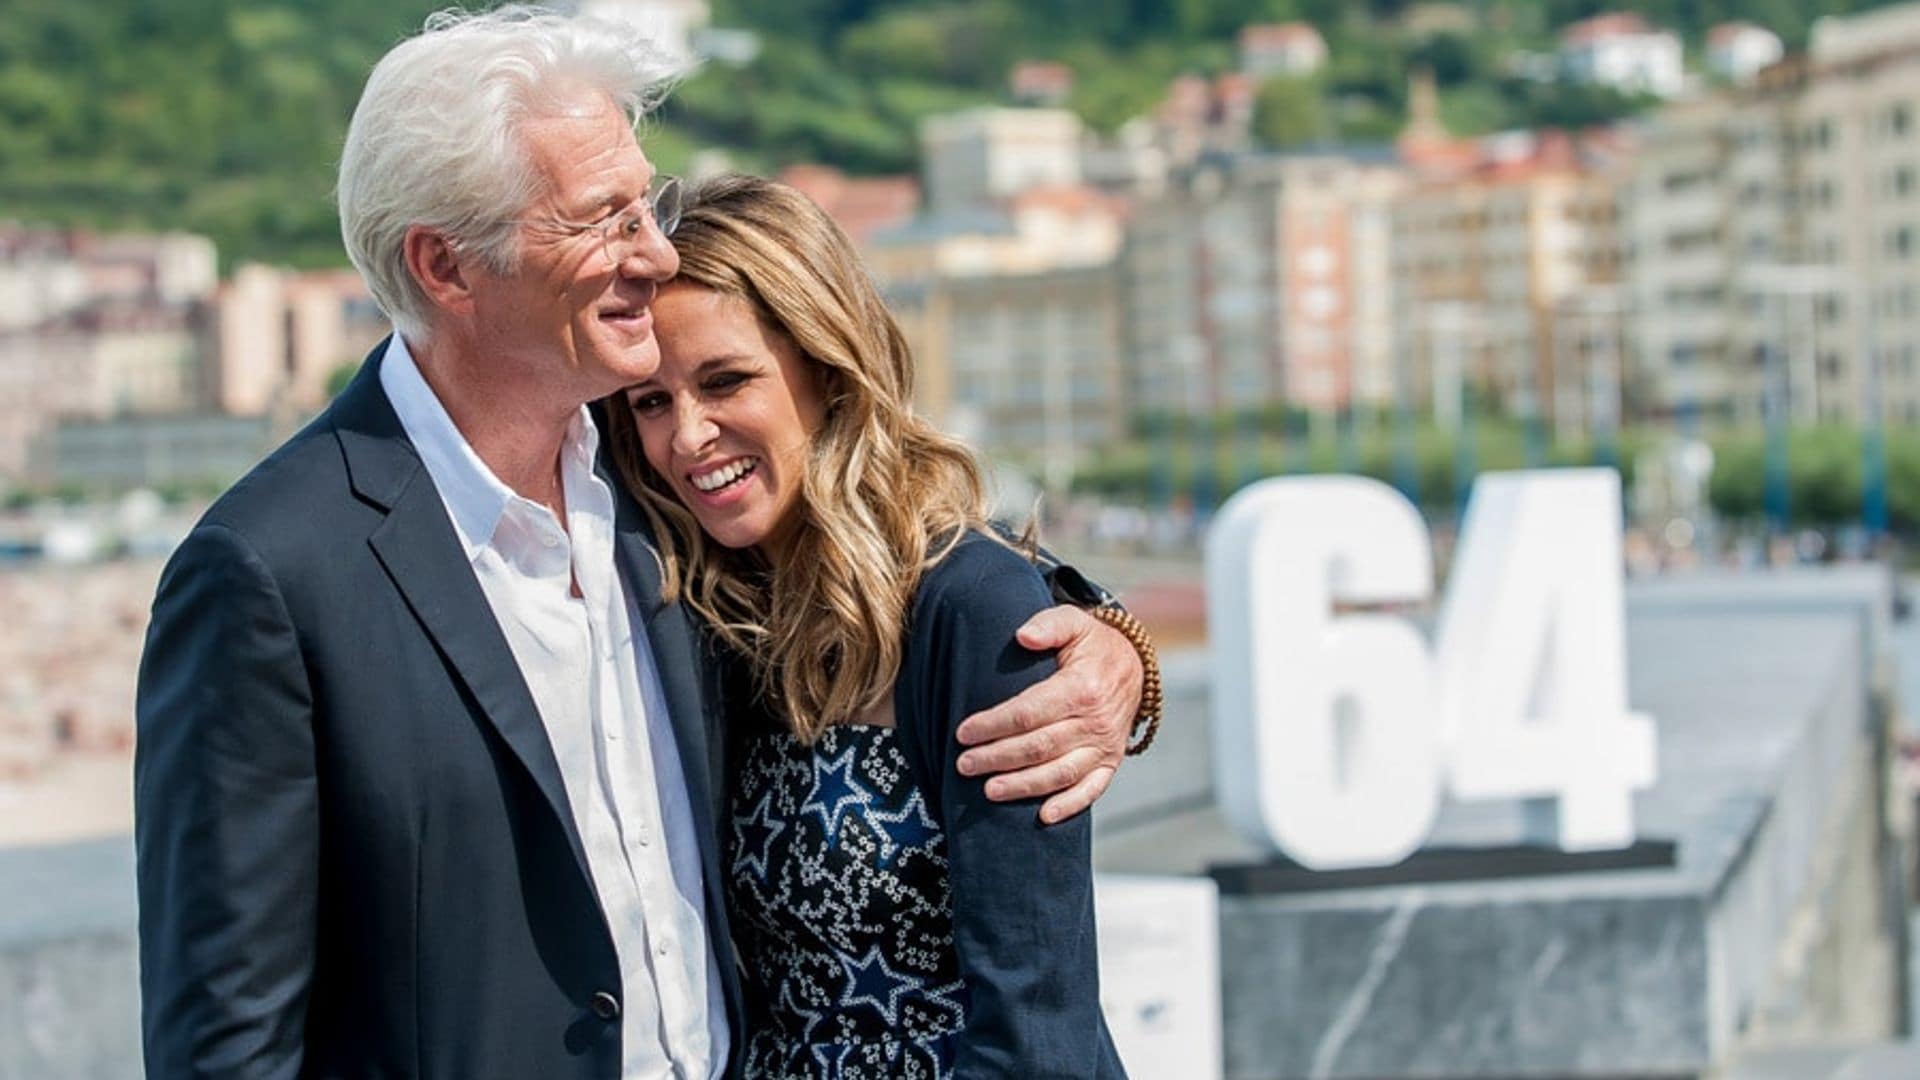 Richard Gere and Alejandra Silva's New York wedding included a Buddhist ceremony and three outfit changes